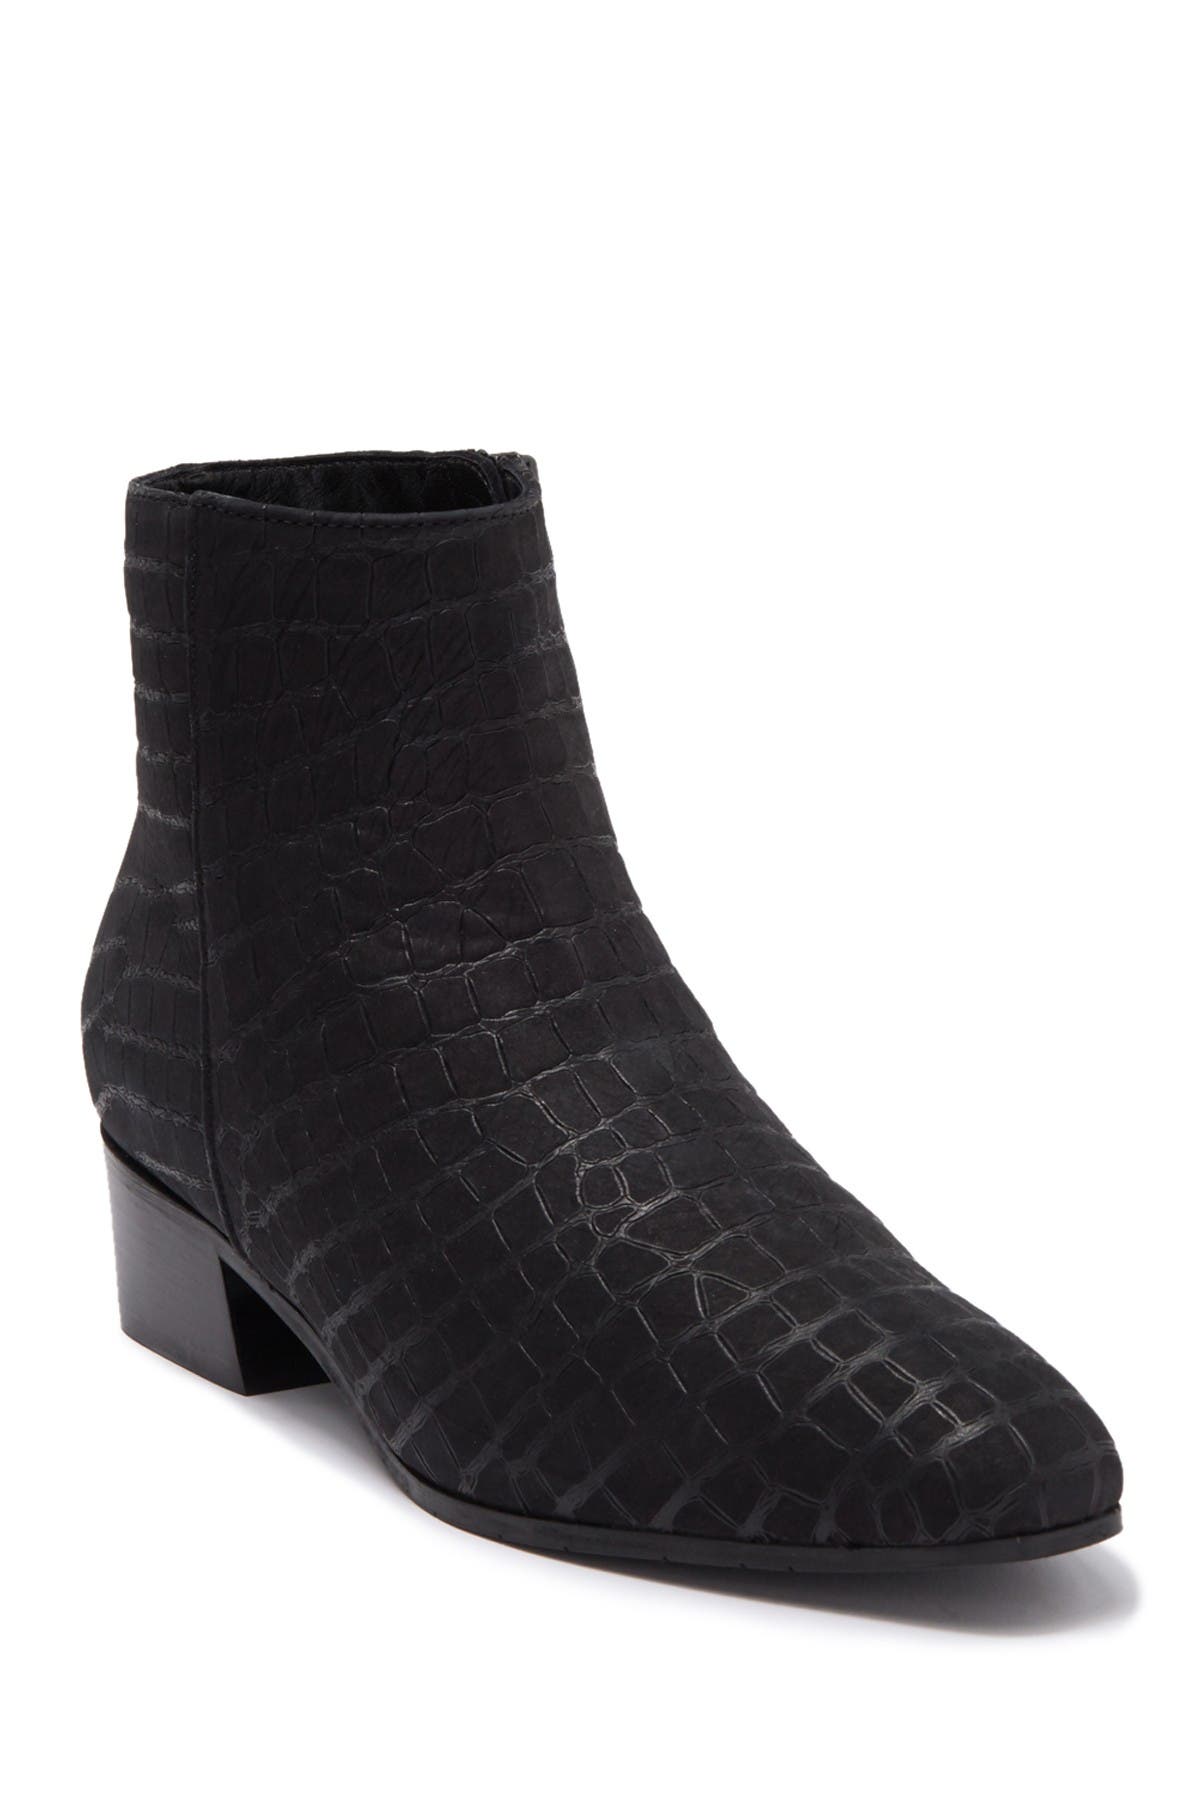 Fuoco Croc Embossed Leather Bootie 